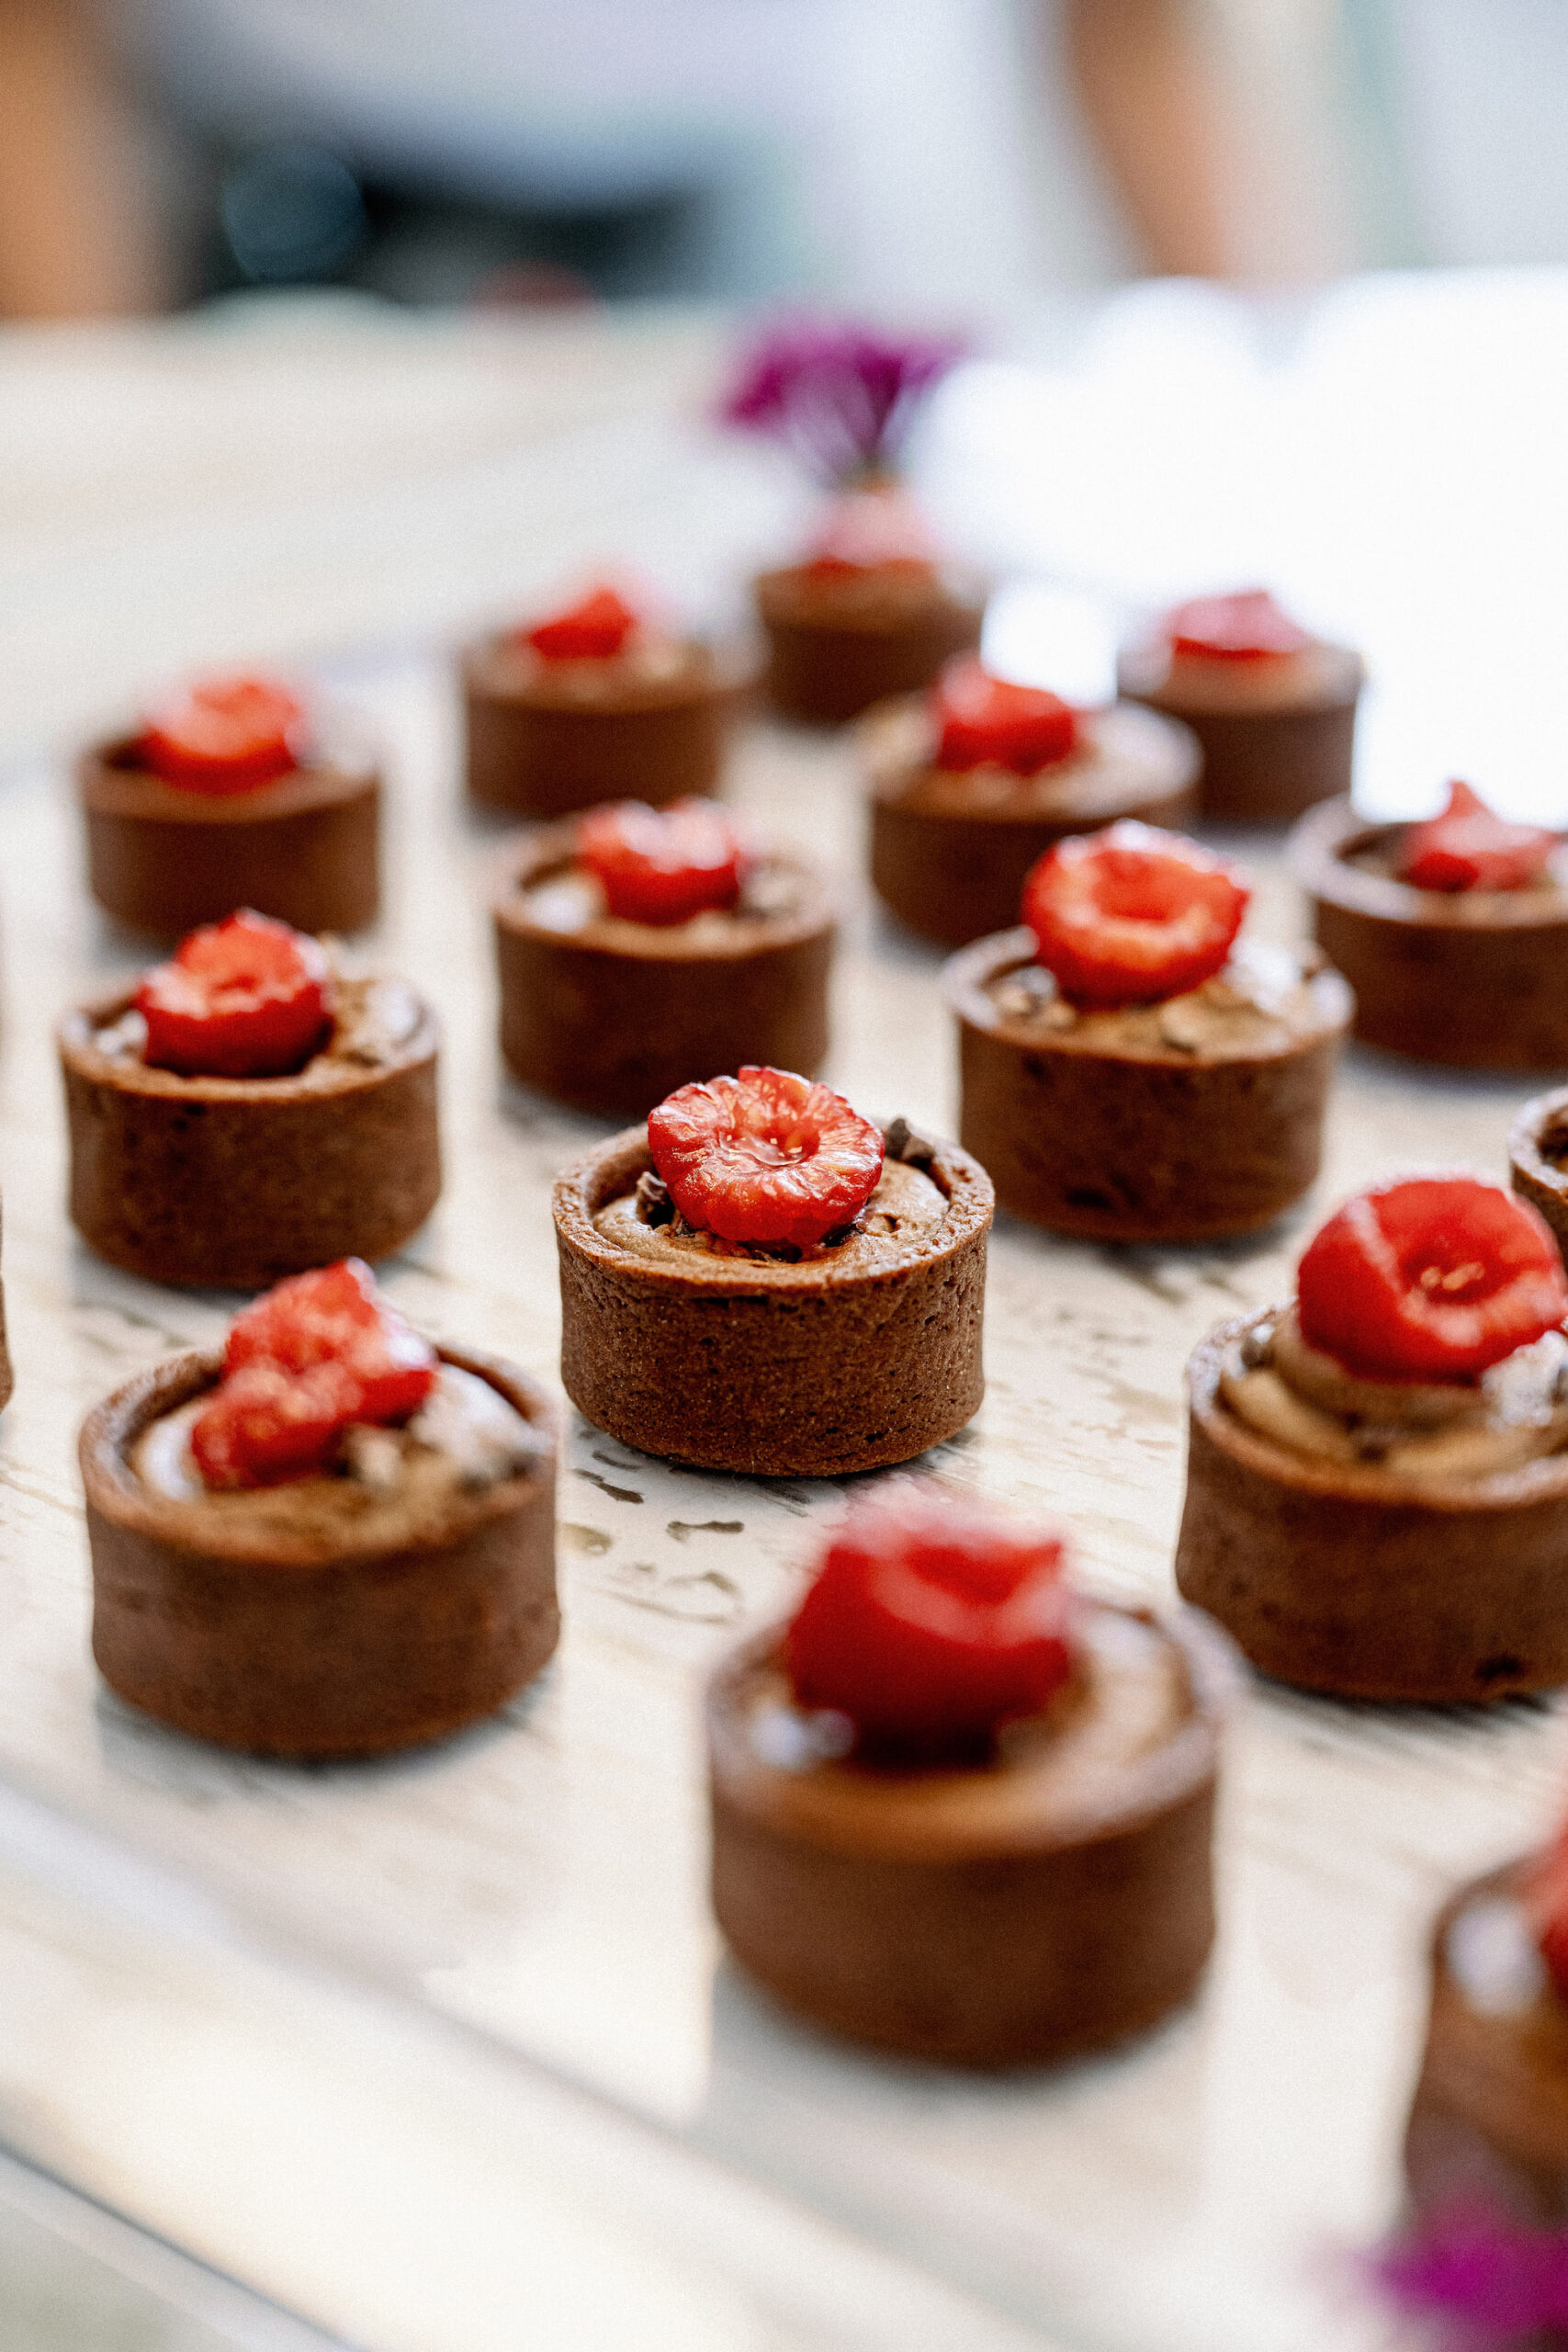 Tampa Bay Catering Company Elite Events Catering | Dewitt for Love Photography | Chocolate Mousse Cups with Fresh Raspberries